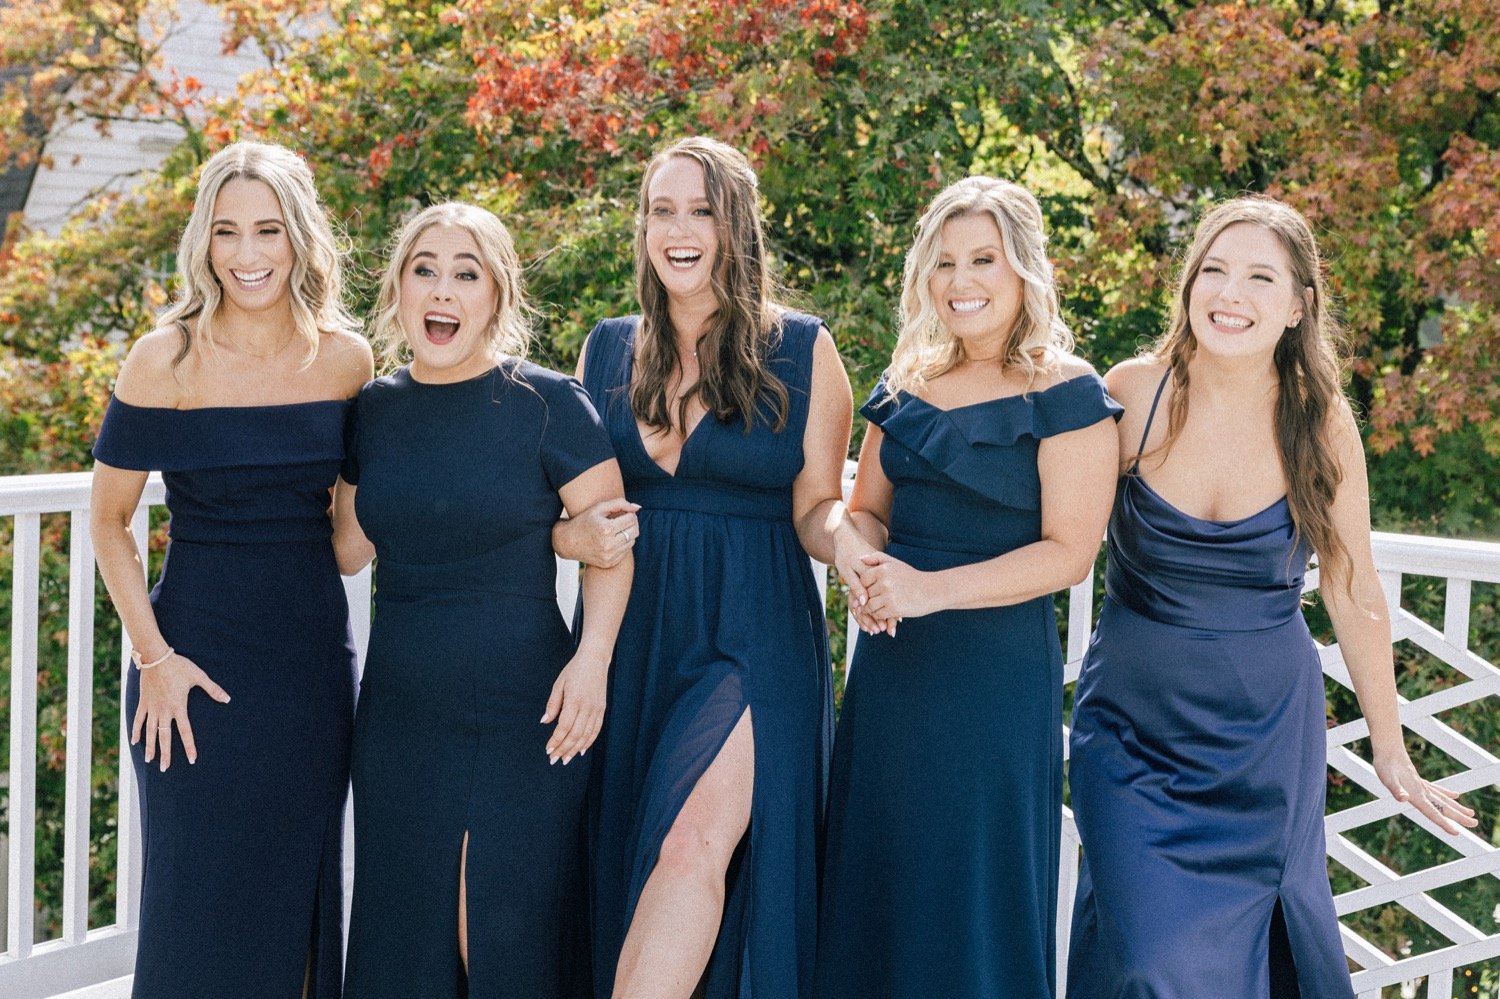  Five women in navy blue dresses hold hands and smile 